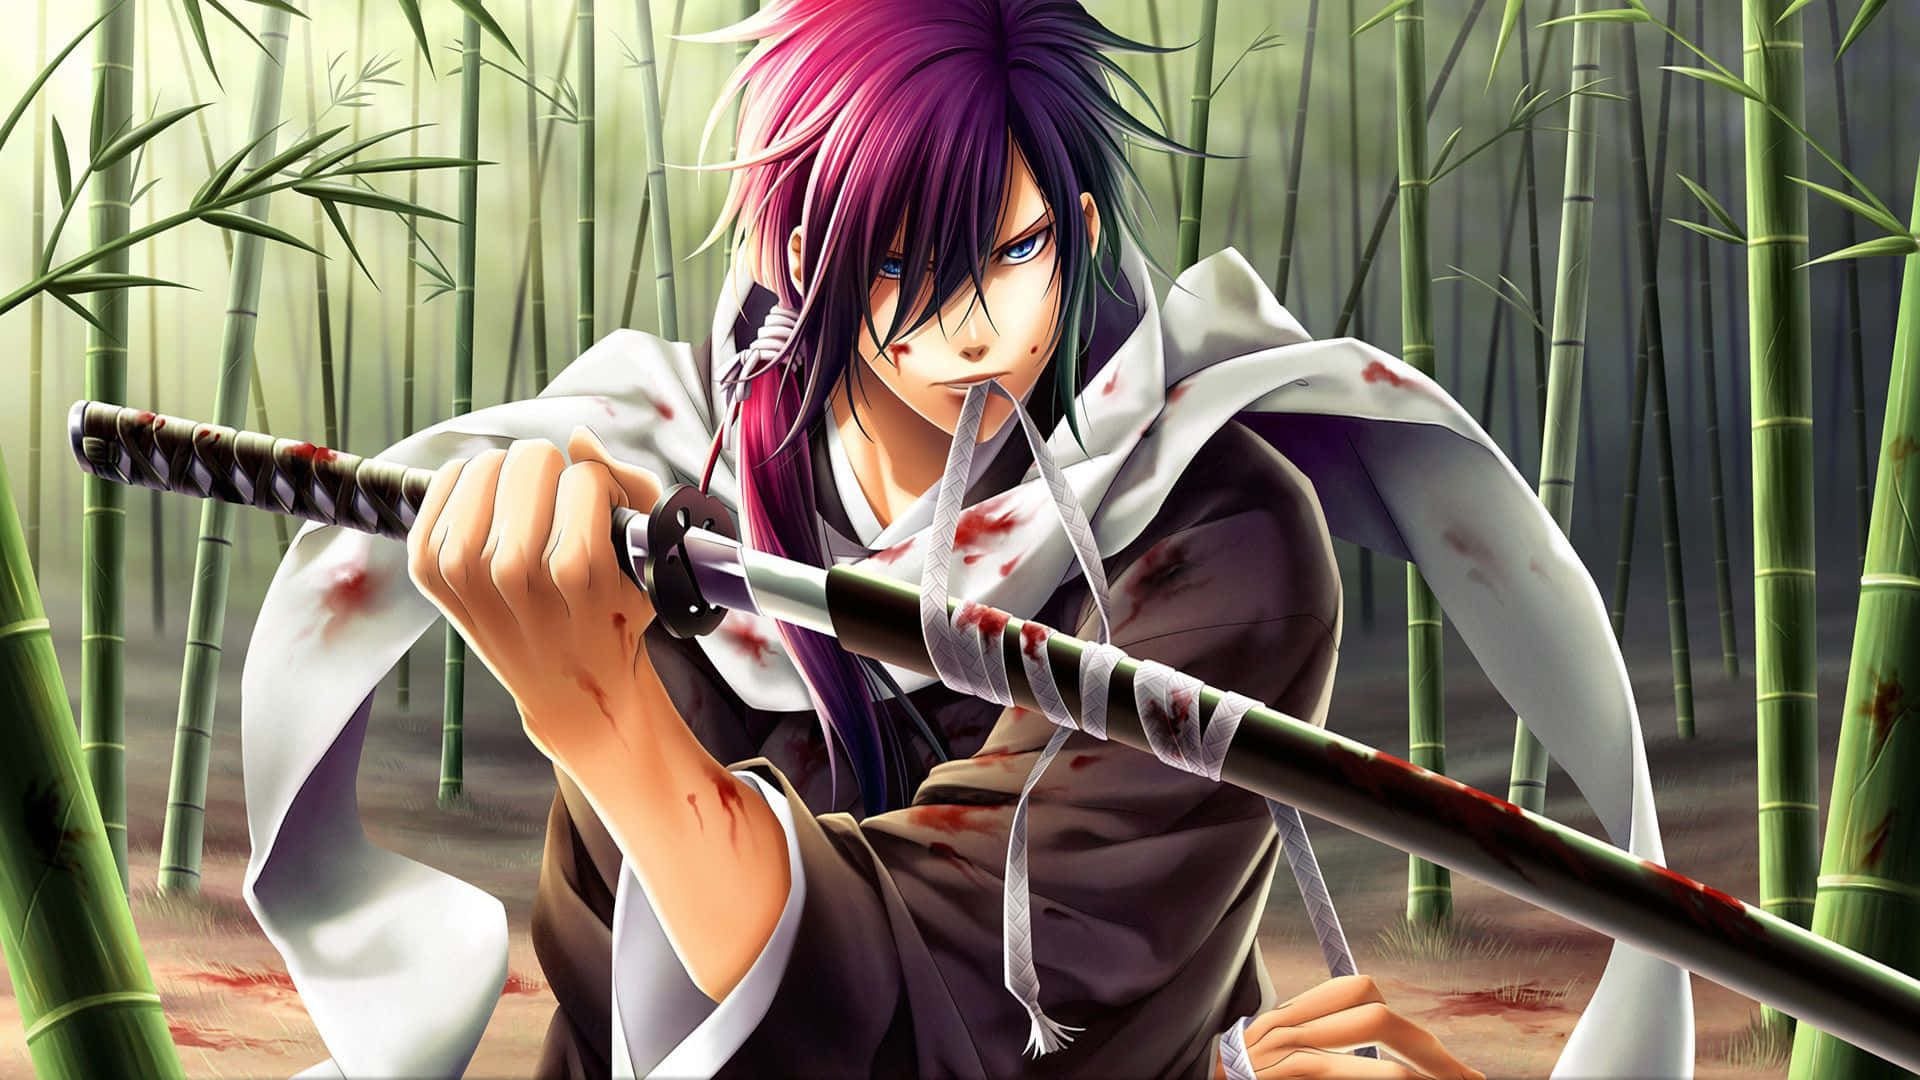 Free Male Anime Characters Wallpaper Downloads, [100+] Male Anime Characters  Wallpapers for FREE 